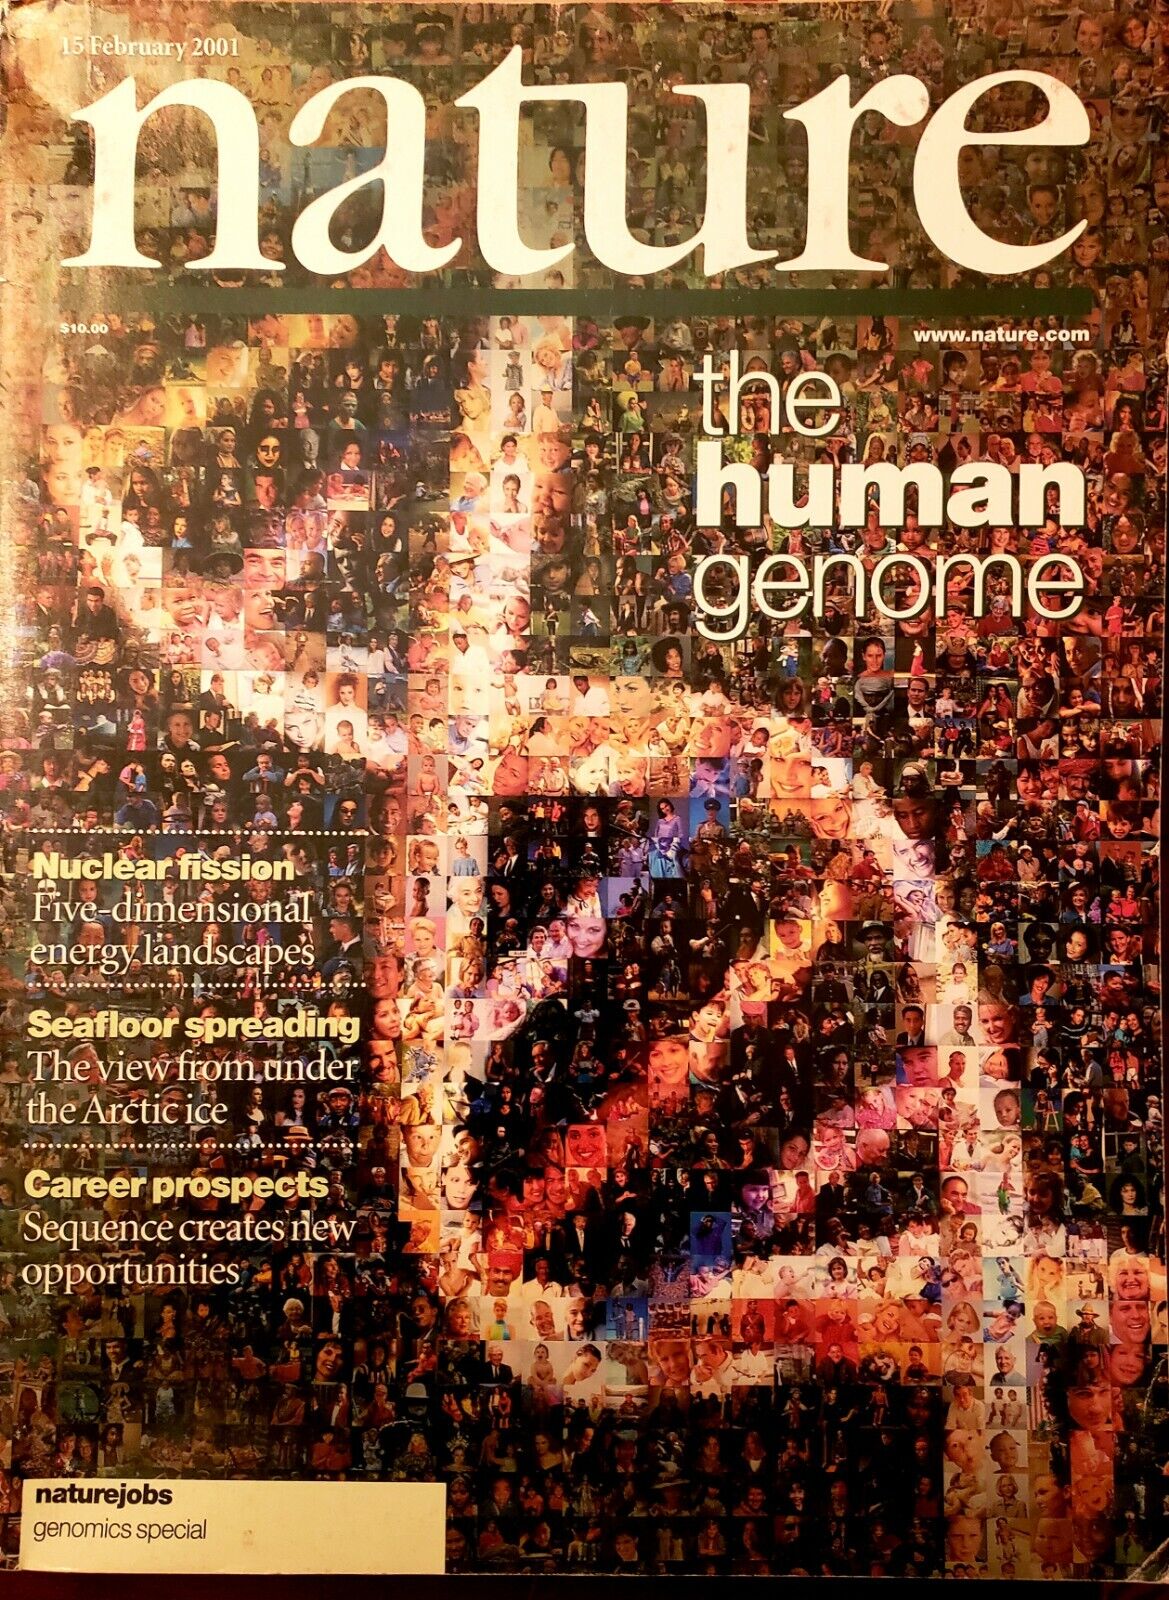  THE HUMAN GENOME SPECIAL ISSUES Science 16 Feb 2001 AND Nature 15 Feb 2001